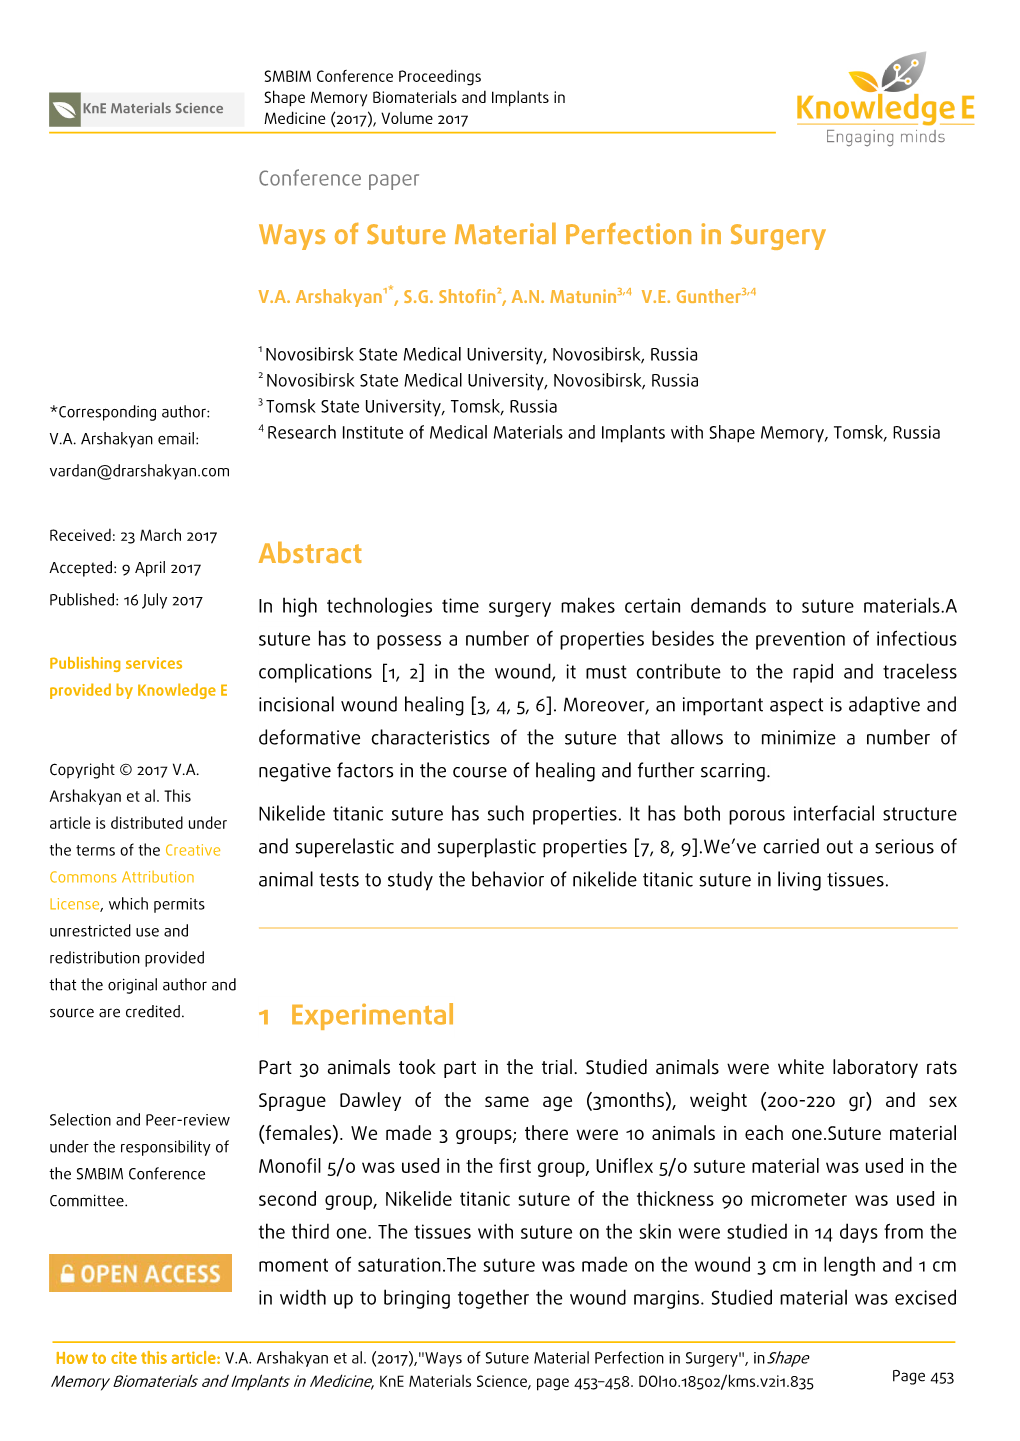 Ways of Suture Material Perfection in Surgery Abstract 1 Experimental